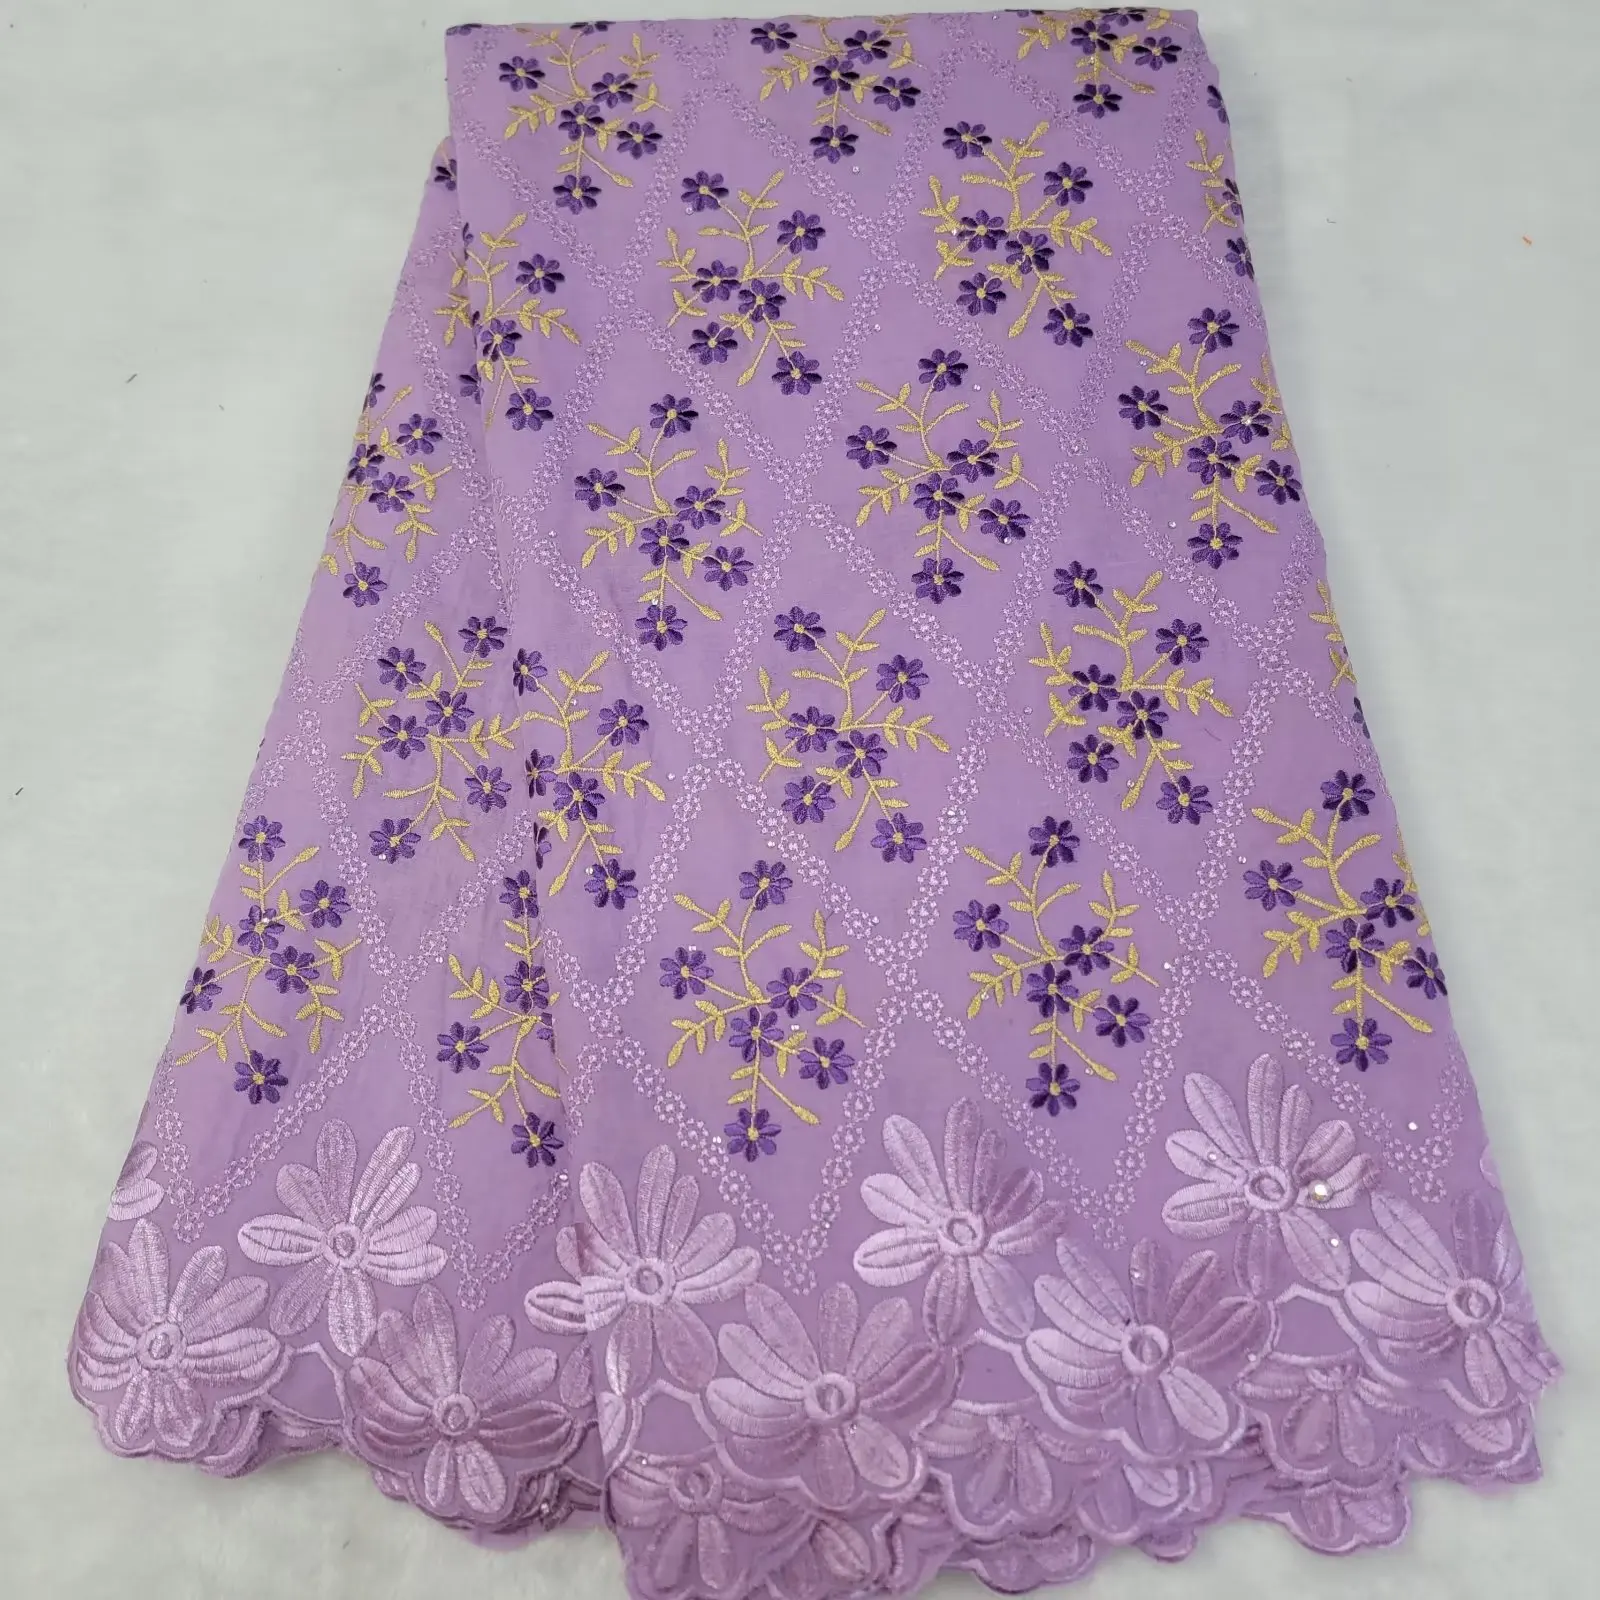 

Lilac African Lace Fabric, Cotton Swiss Voile, Embroidery Fabric for Party Dress, 5 Yards